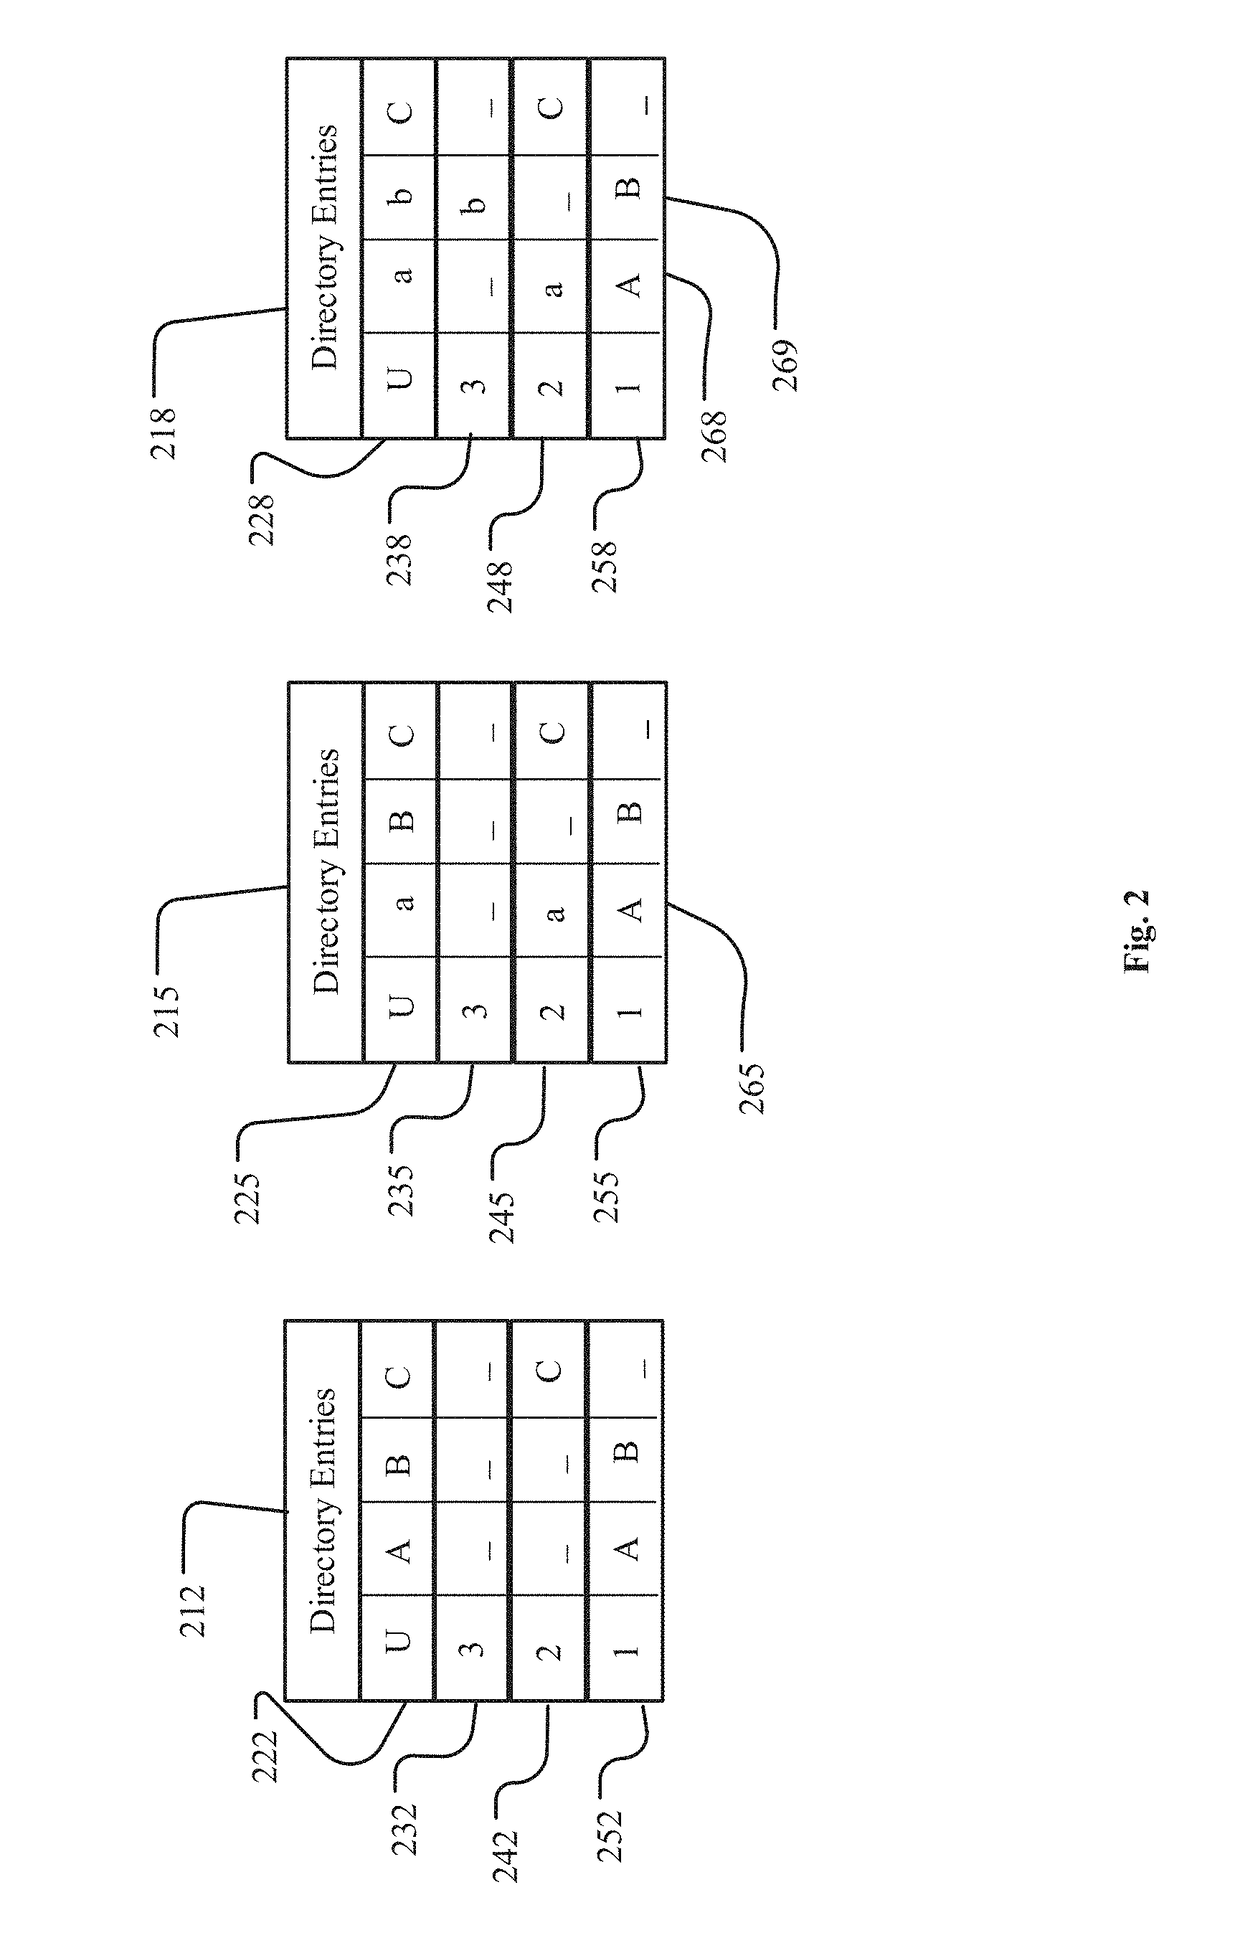 Multi-tier file system with transparent holes